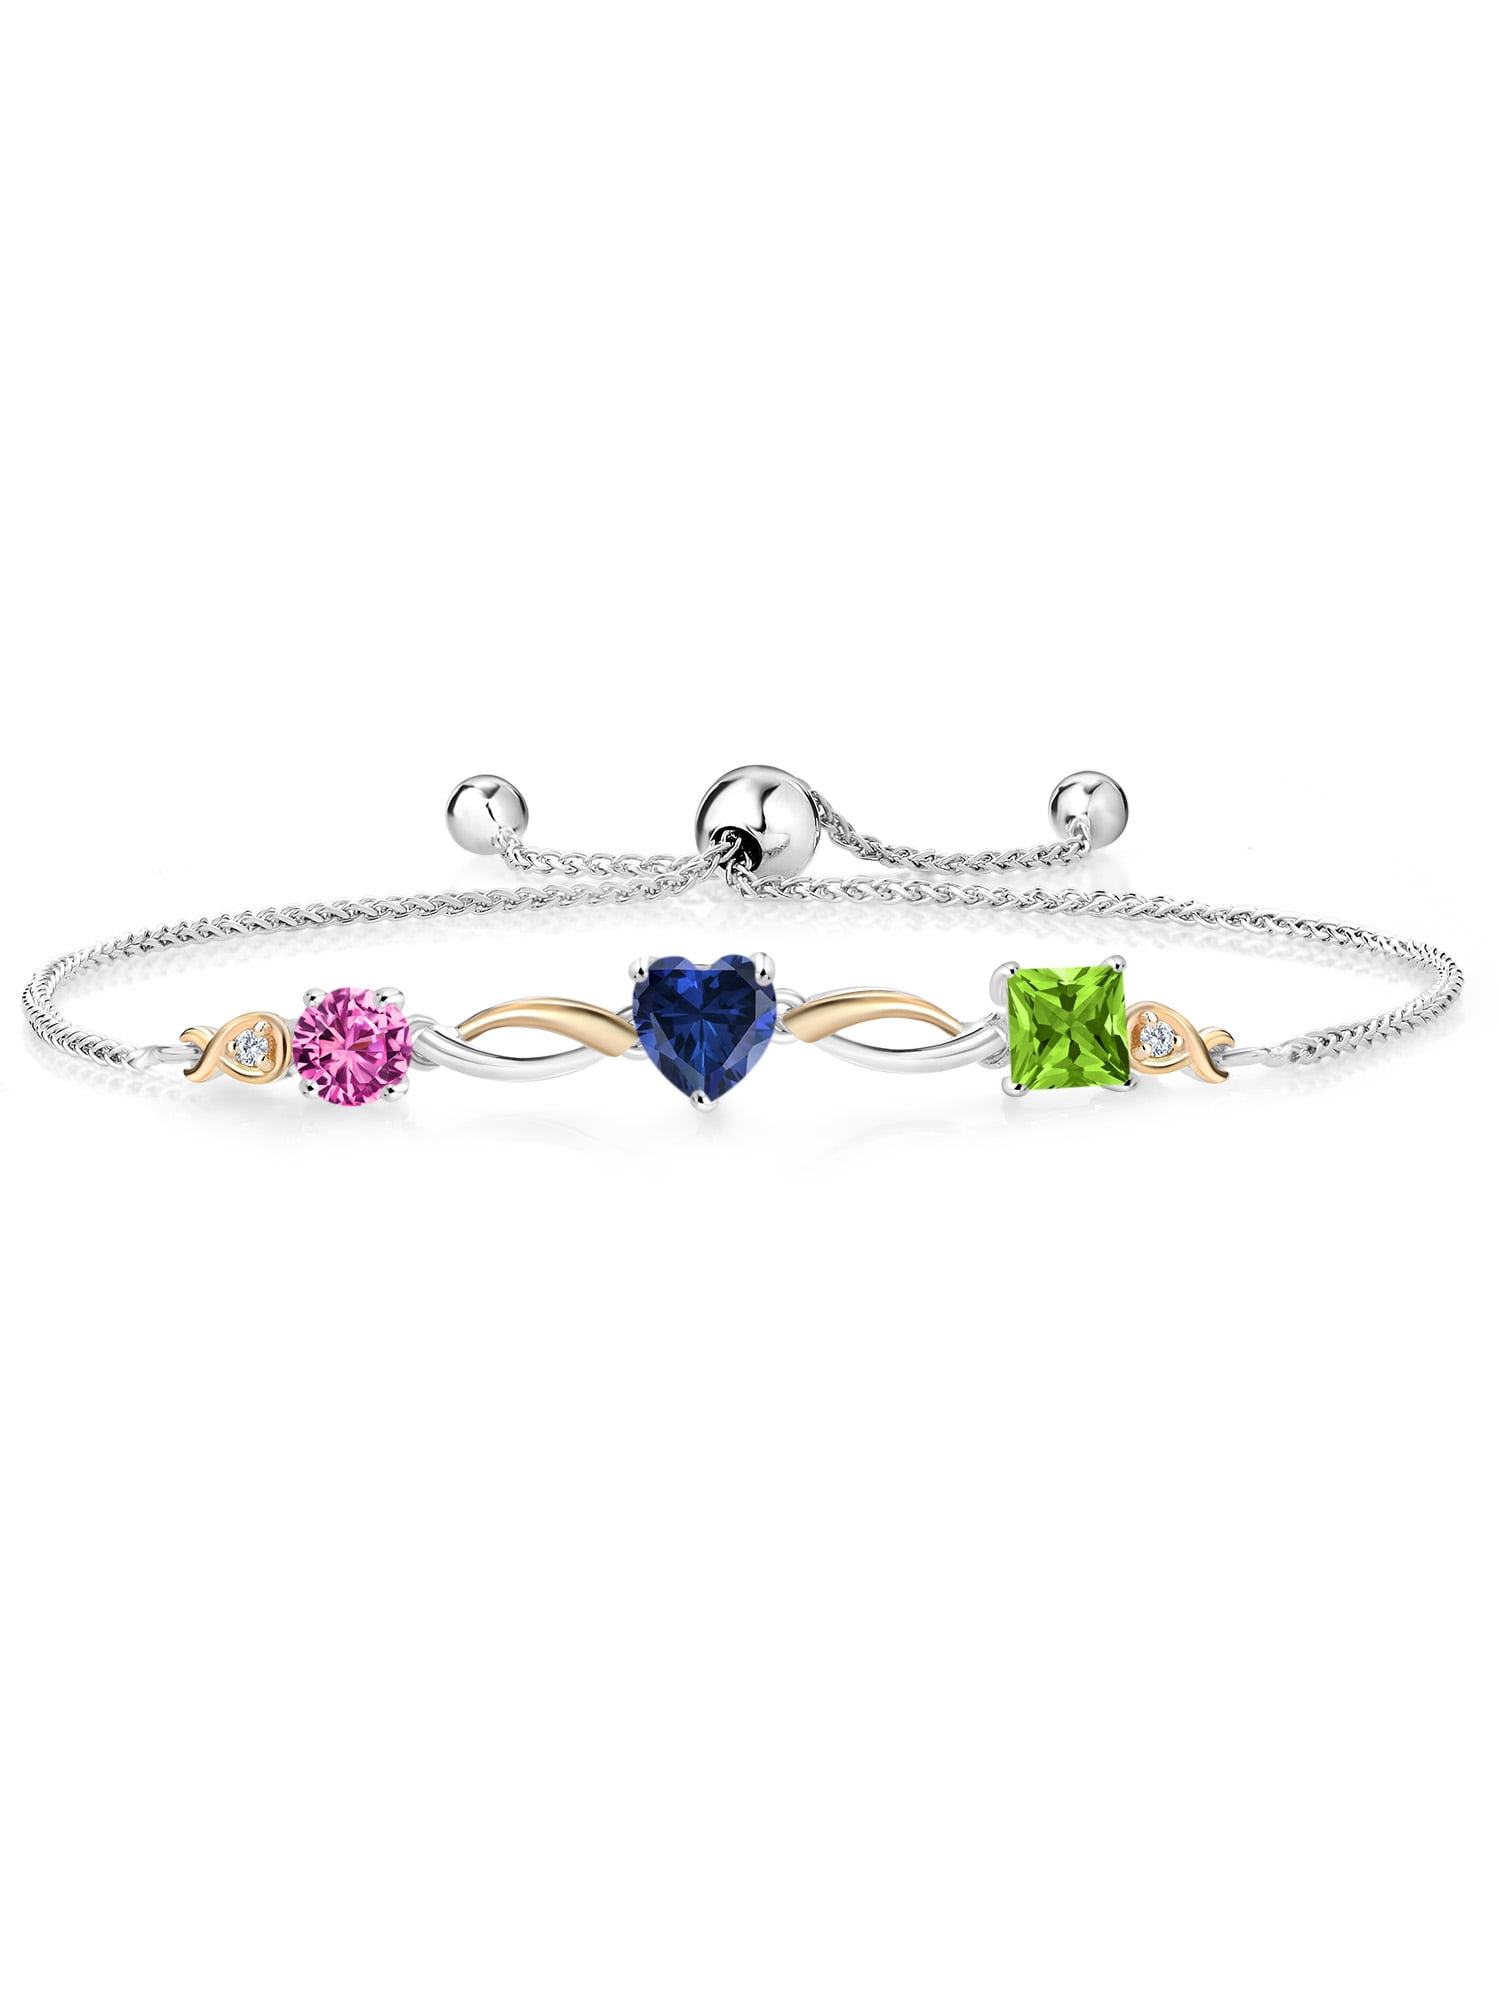 Gem Stone King Keren Hanan 1.78 Ct Round Heart Princess Pink Created  Sapphire Blue Created Sapphire 925 Silver and 10K Yellow Gold Bracelet  Fully 